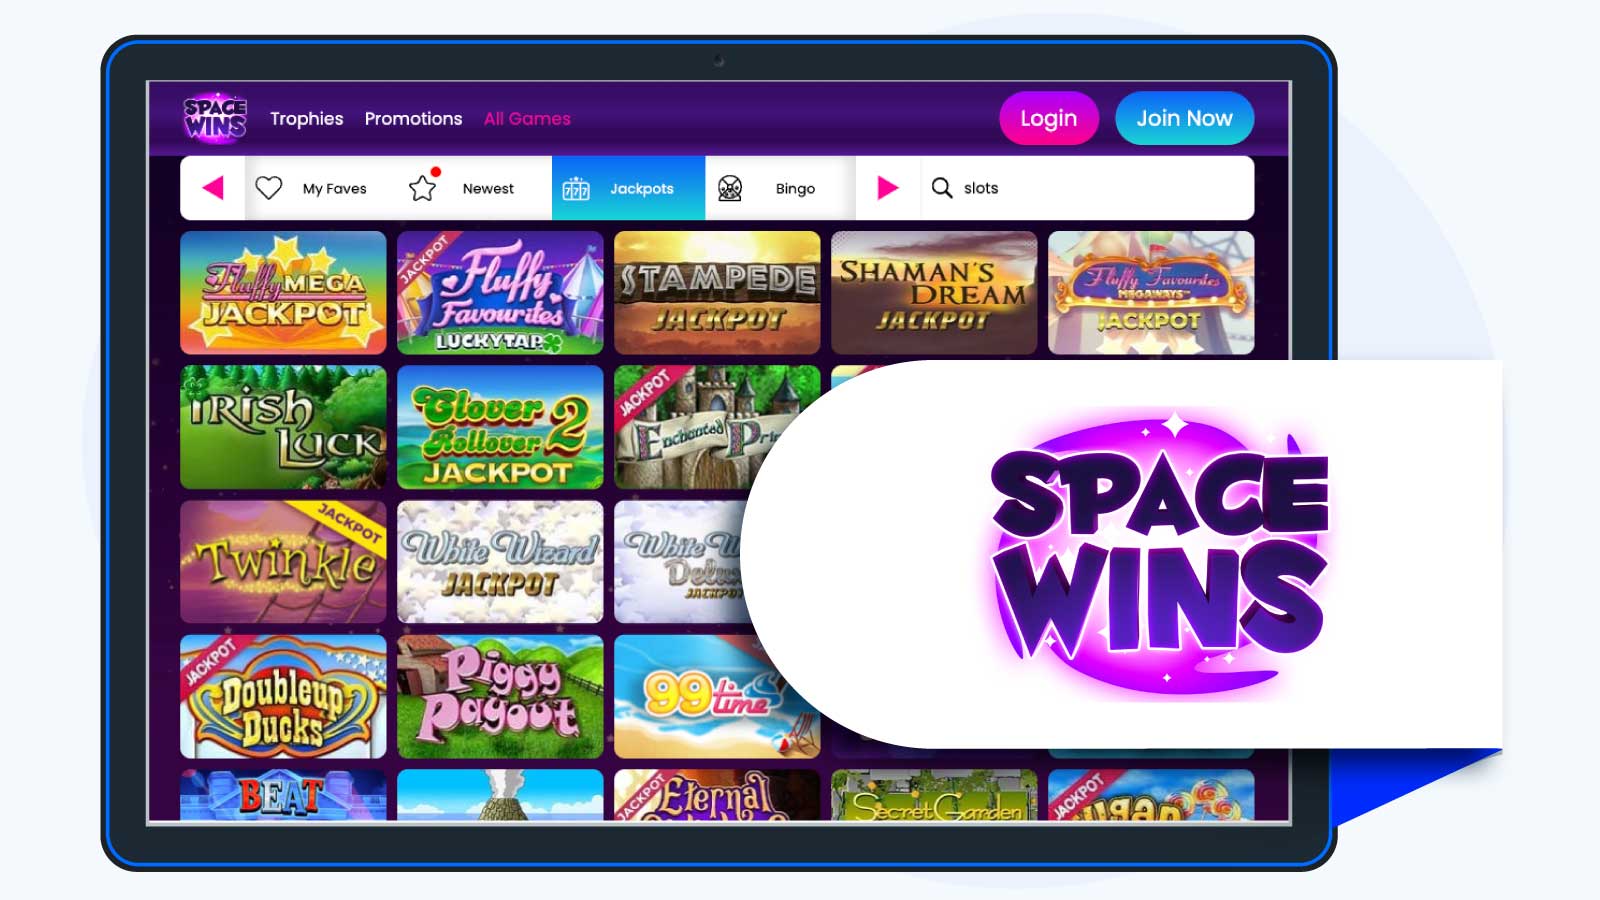 9. Space Wins Casino - Best for Slot Enthusiasts